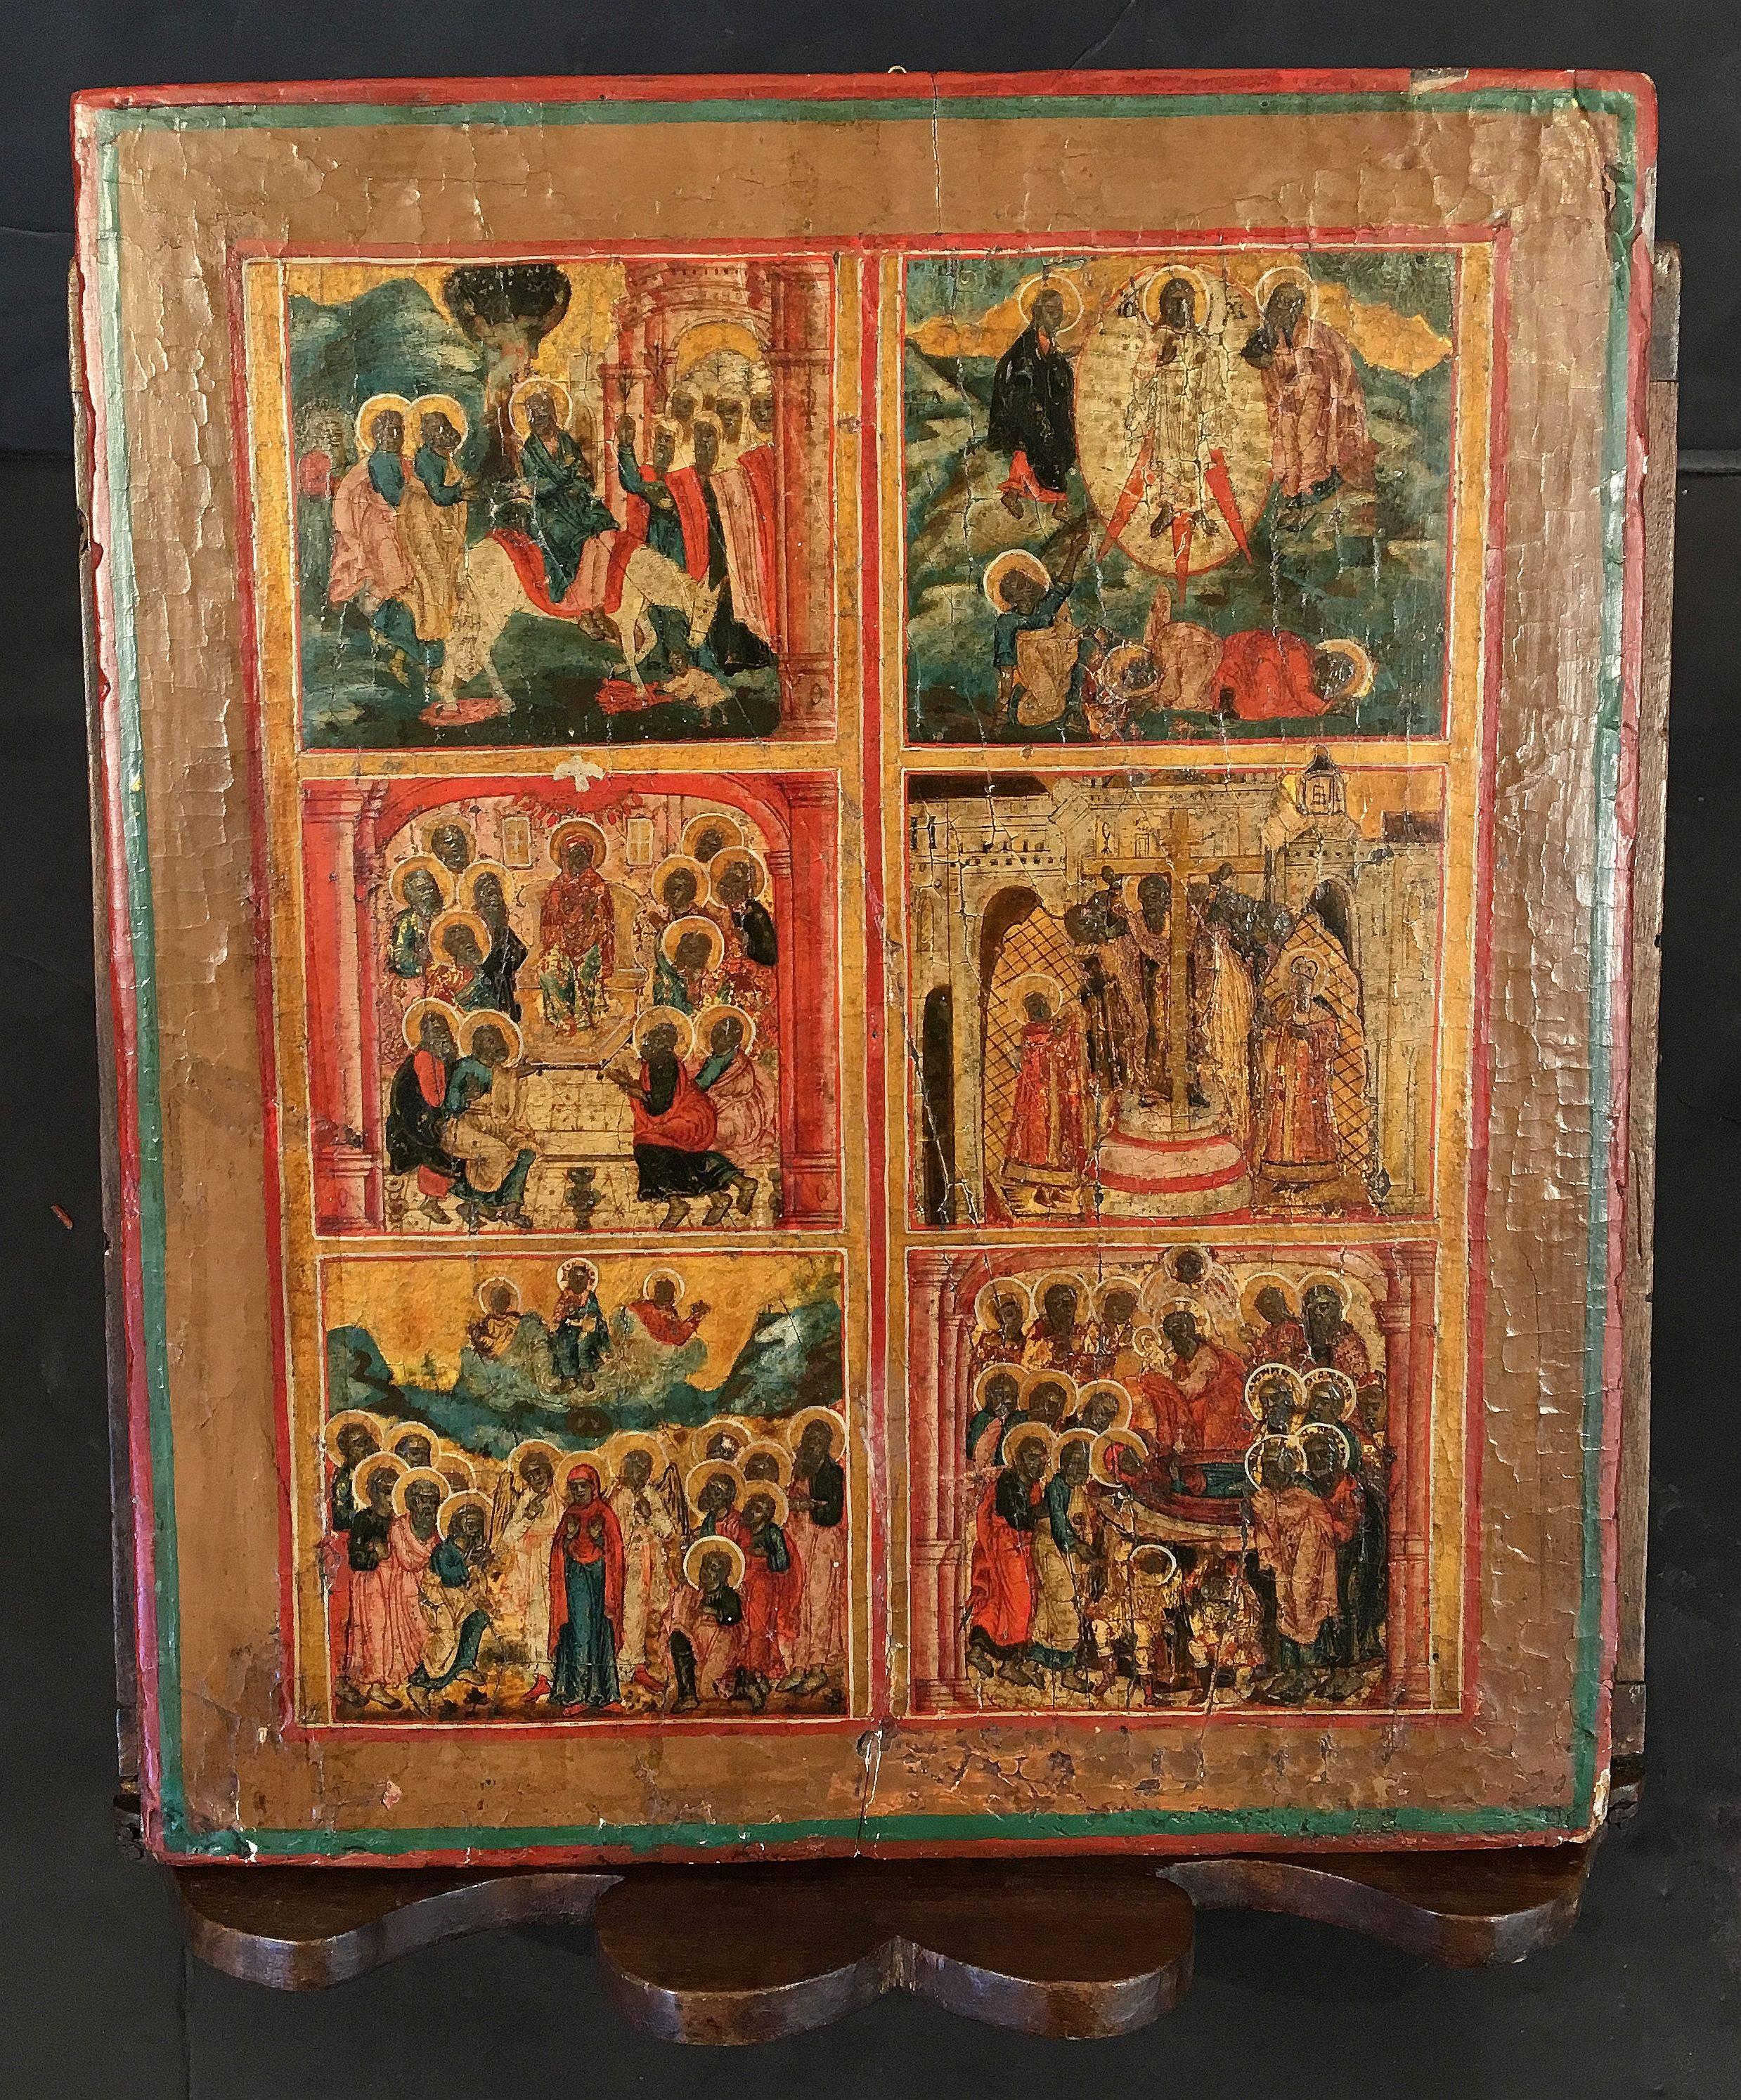 A fine Italian icon from the 18th century, featuring six religious or ecclesiastical scenes depicted with paint on a wood ground, displayed on an adjustable wood easel stand.

Icon measures H 12 in. x W 10 1/2 in x D 1 in.

The stand is slightly